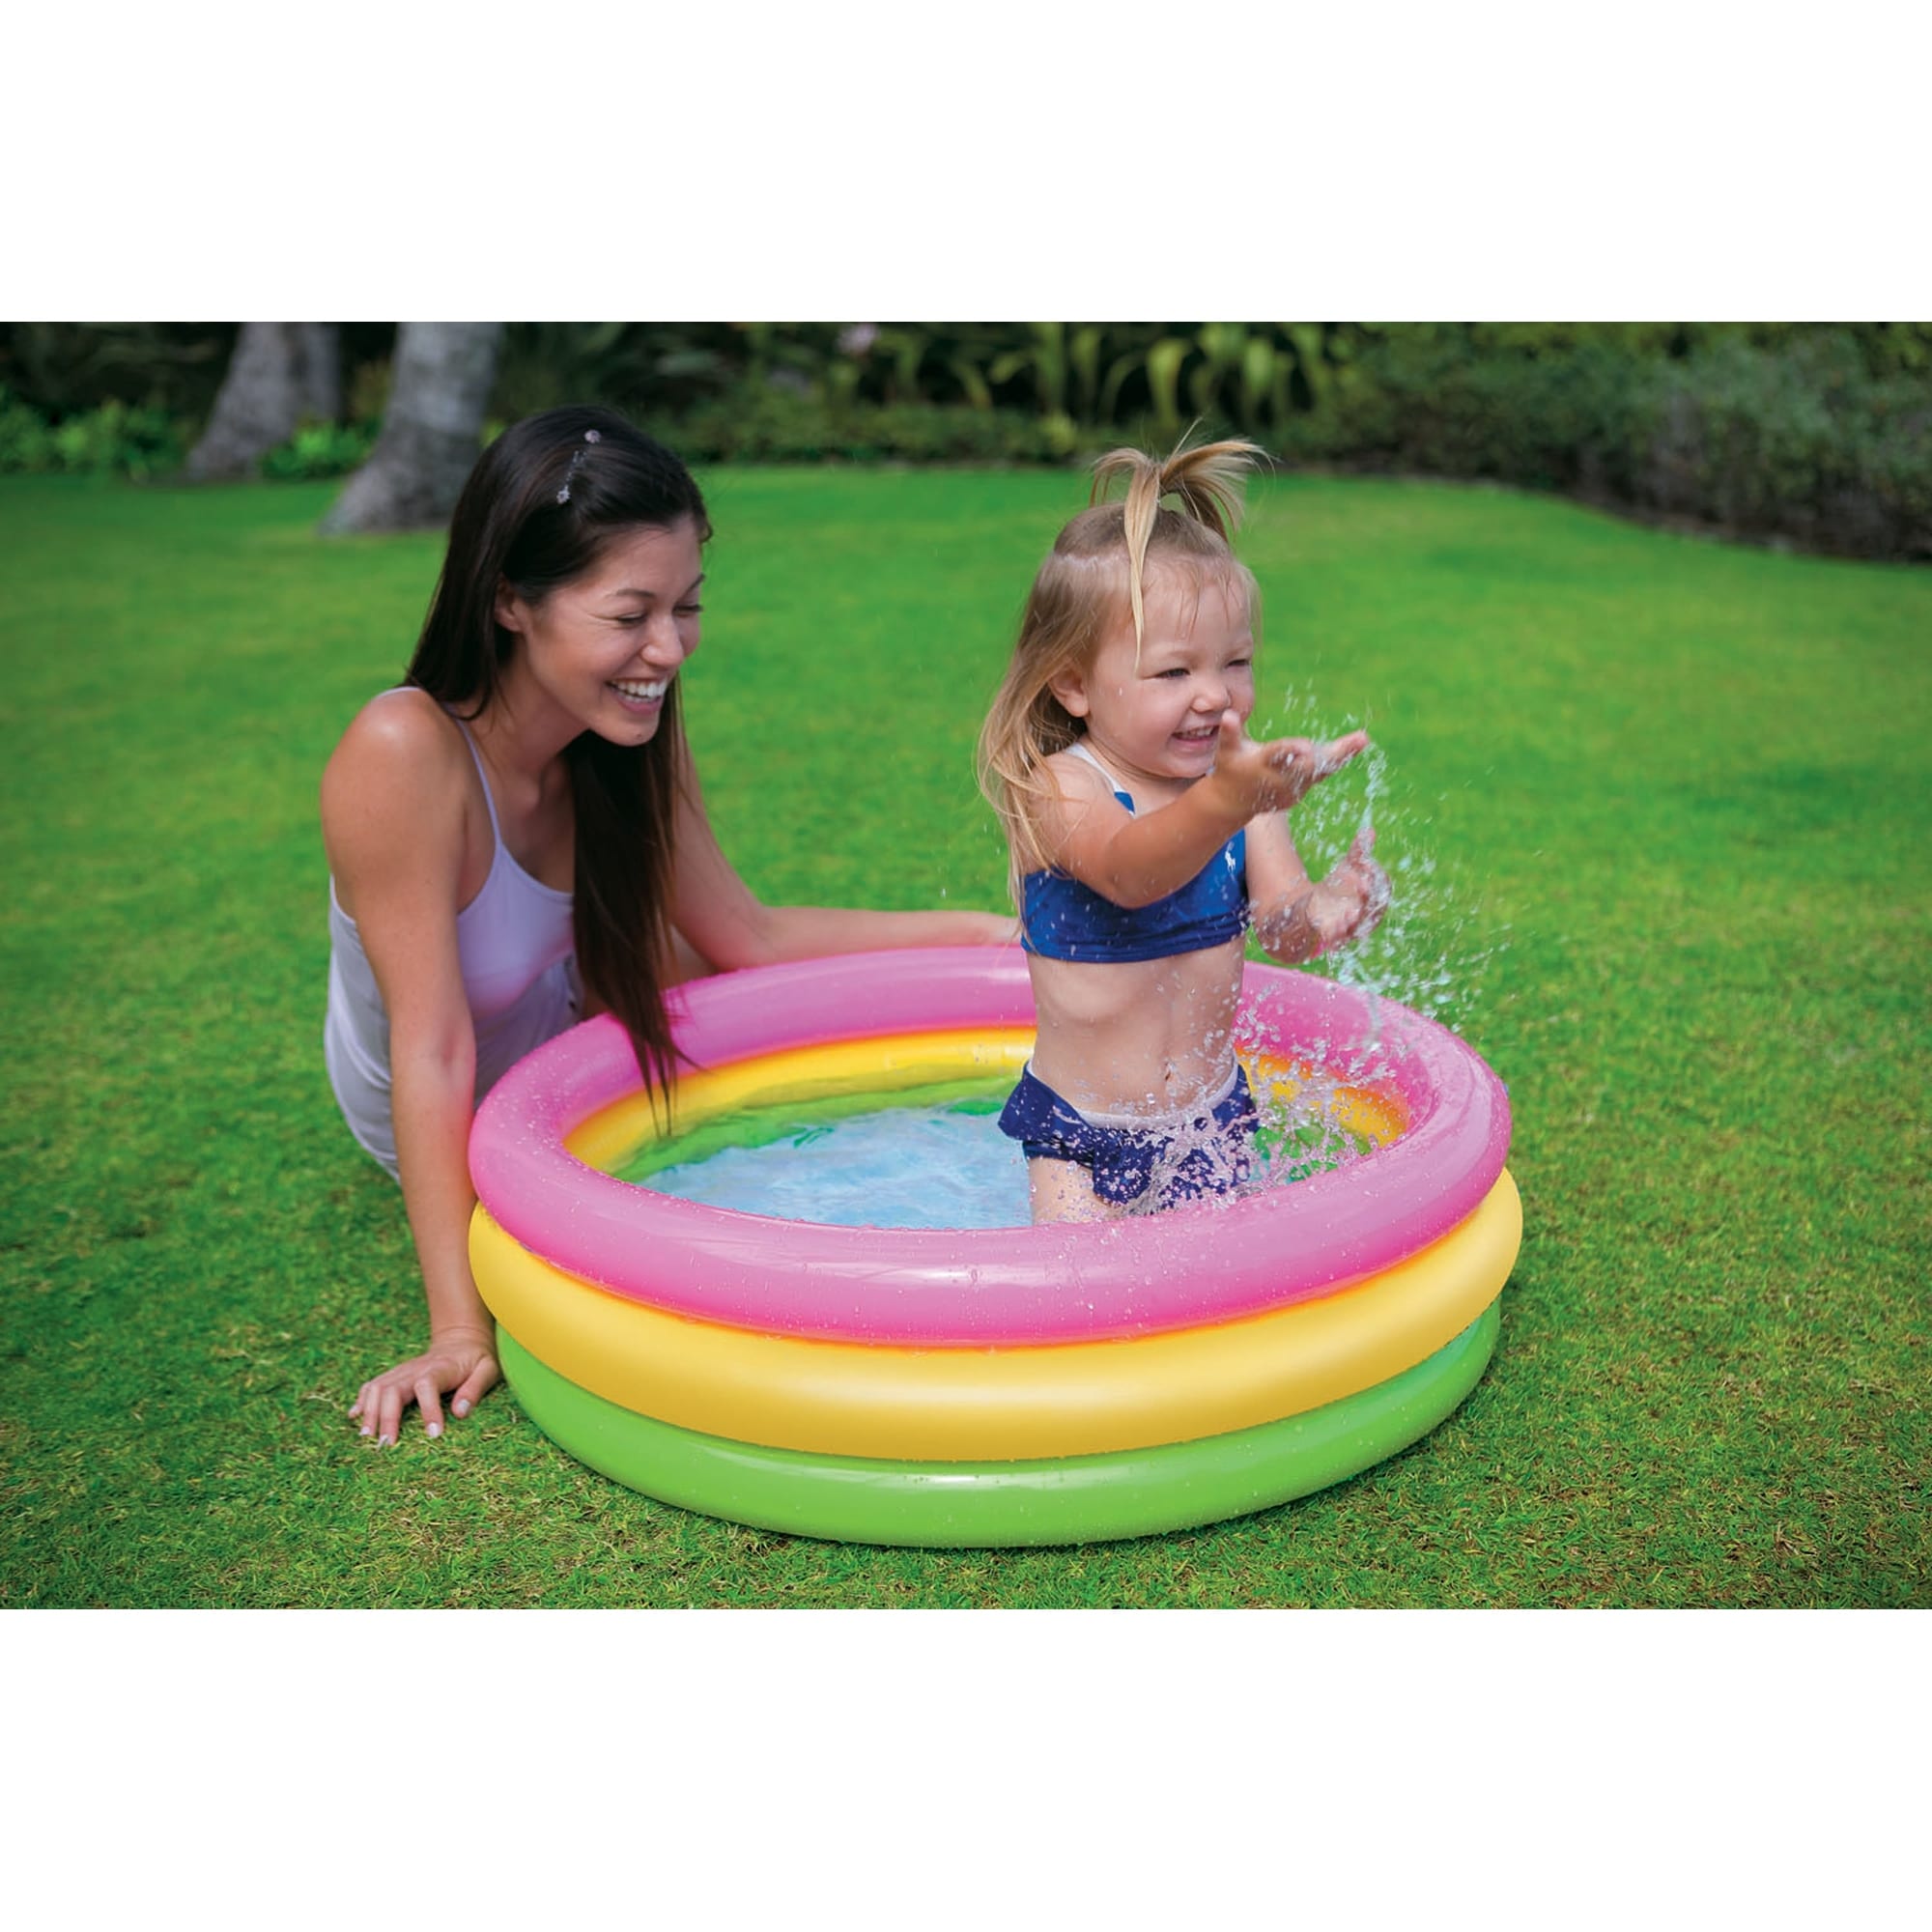 Intex 11ft X 7.5ft X 44in Dinoland Inflatable Kiddie Swimming Pool